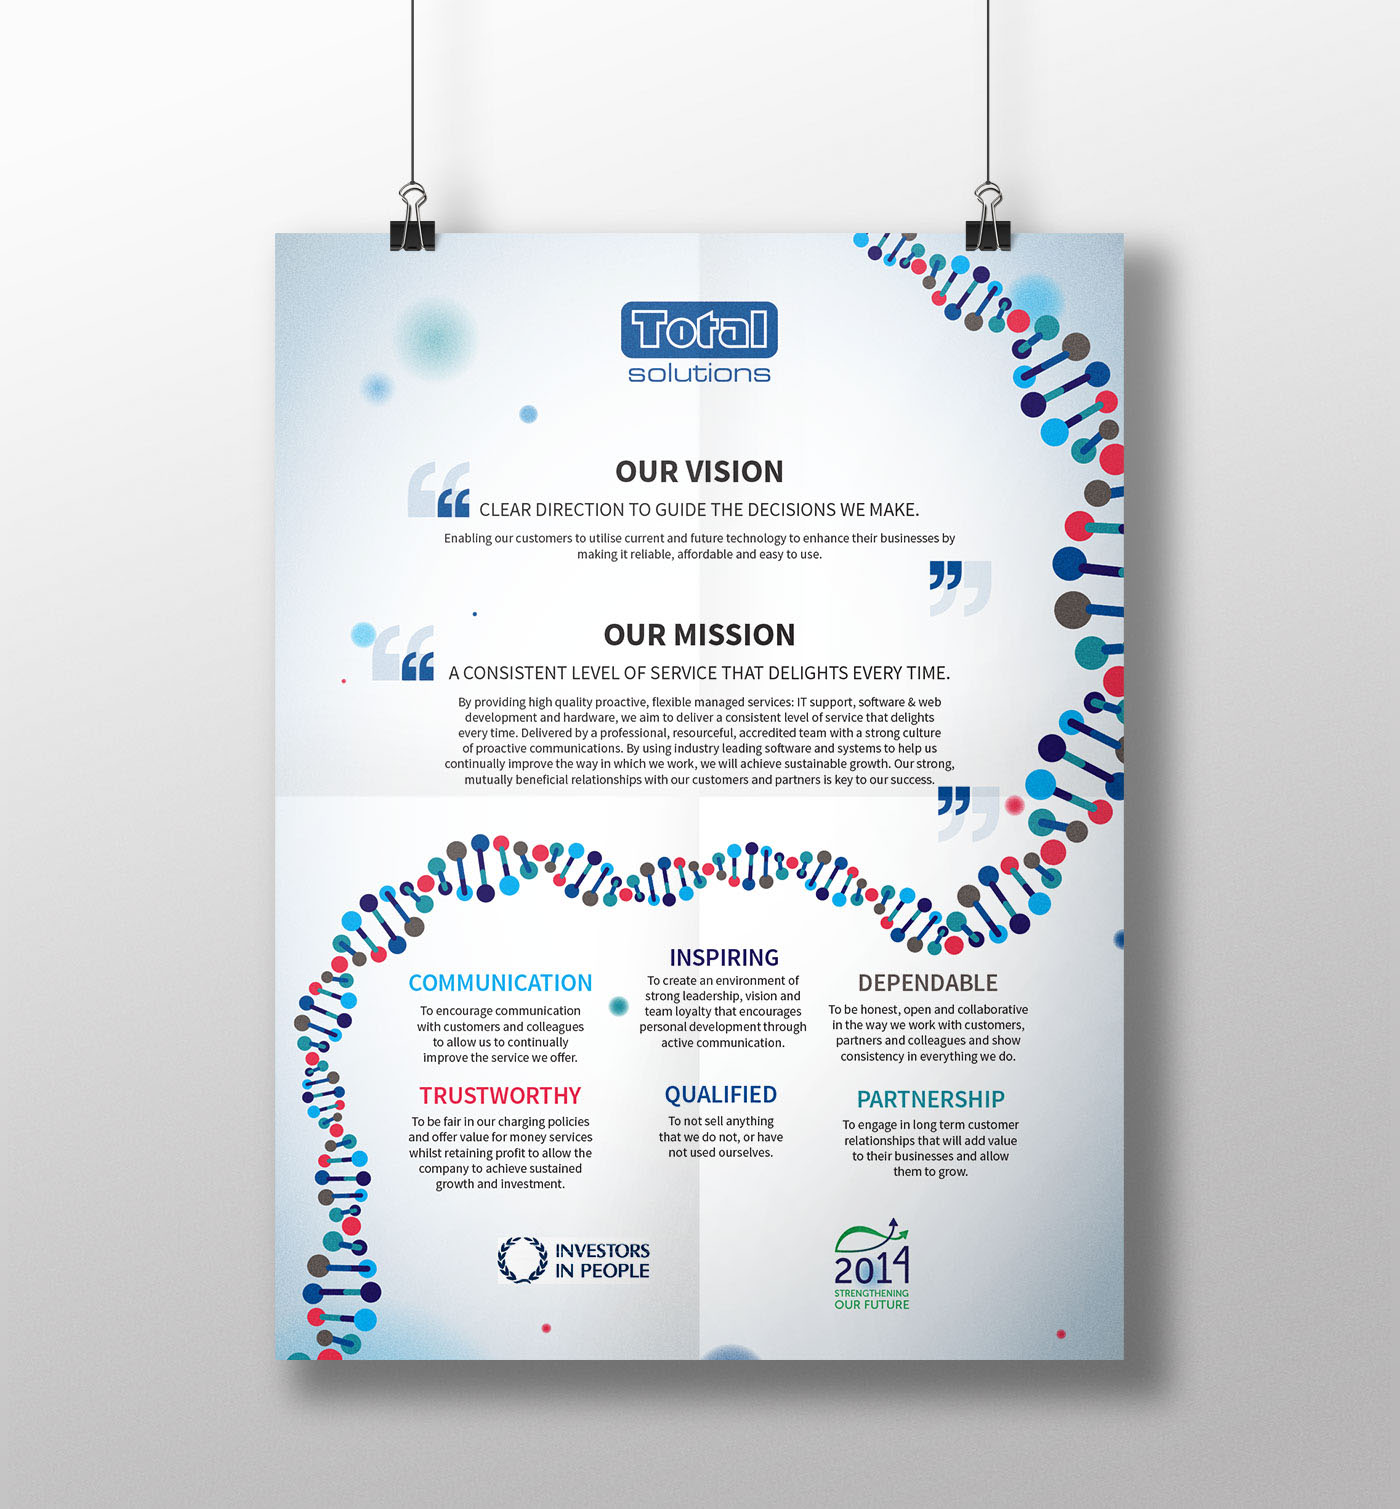 DNA – showing how the vision and values are built into our everyday life. They are part of everything we do from the small to the big. And make us who we are.